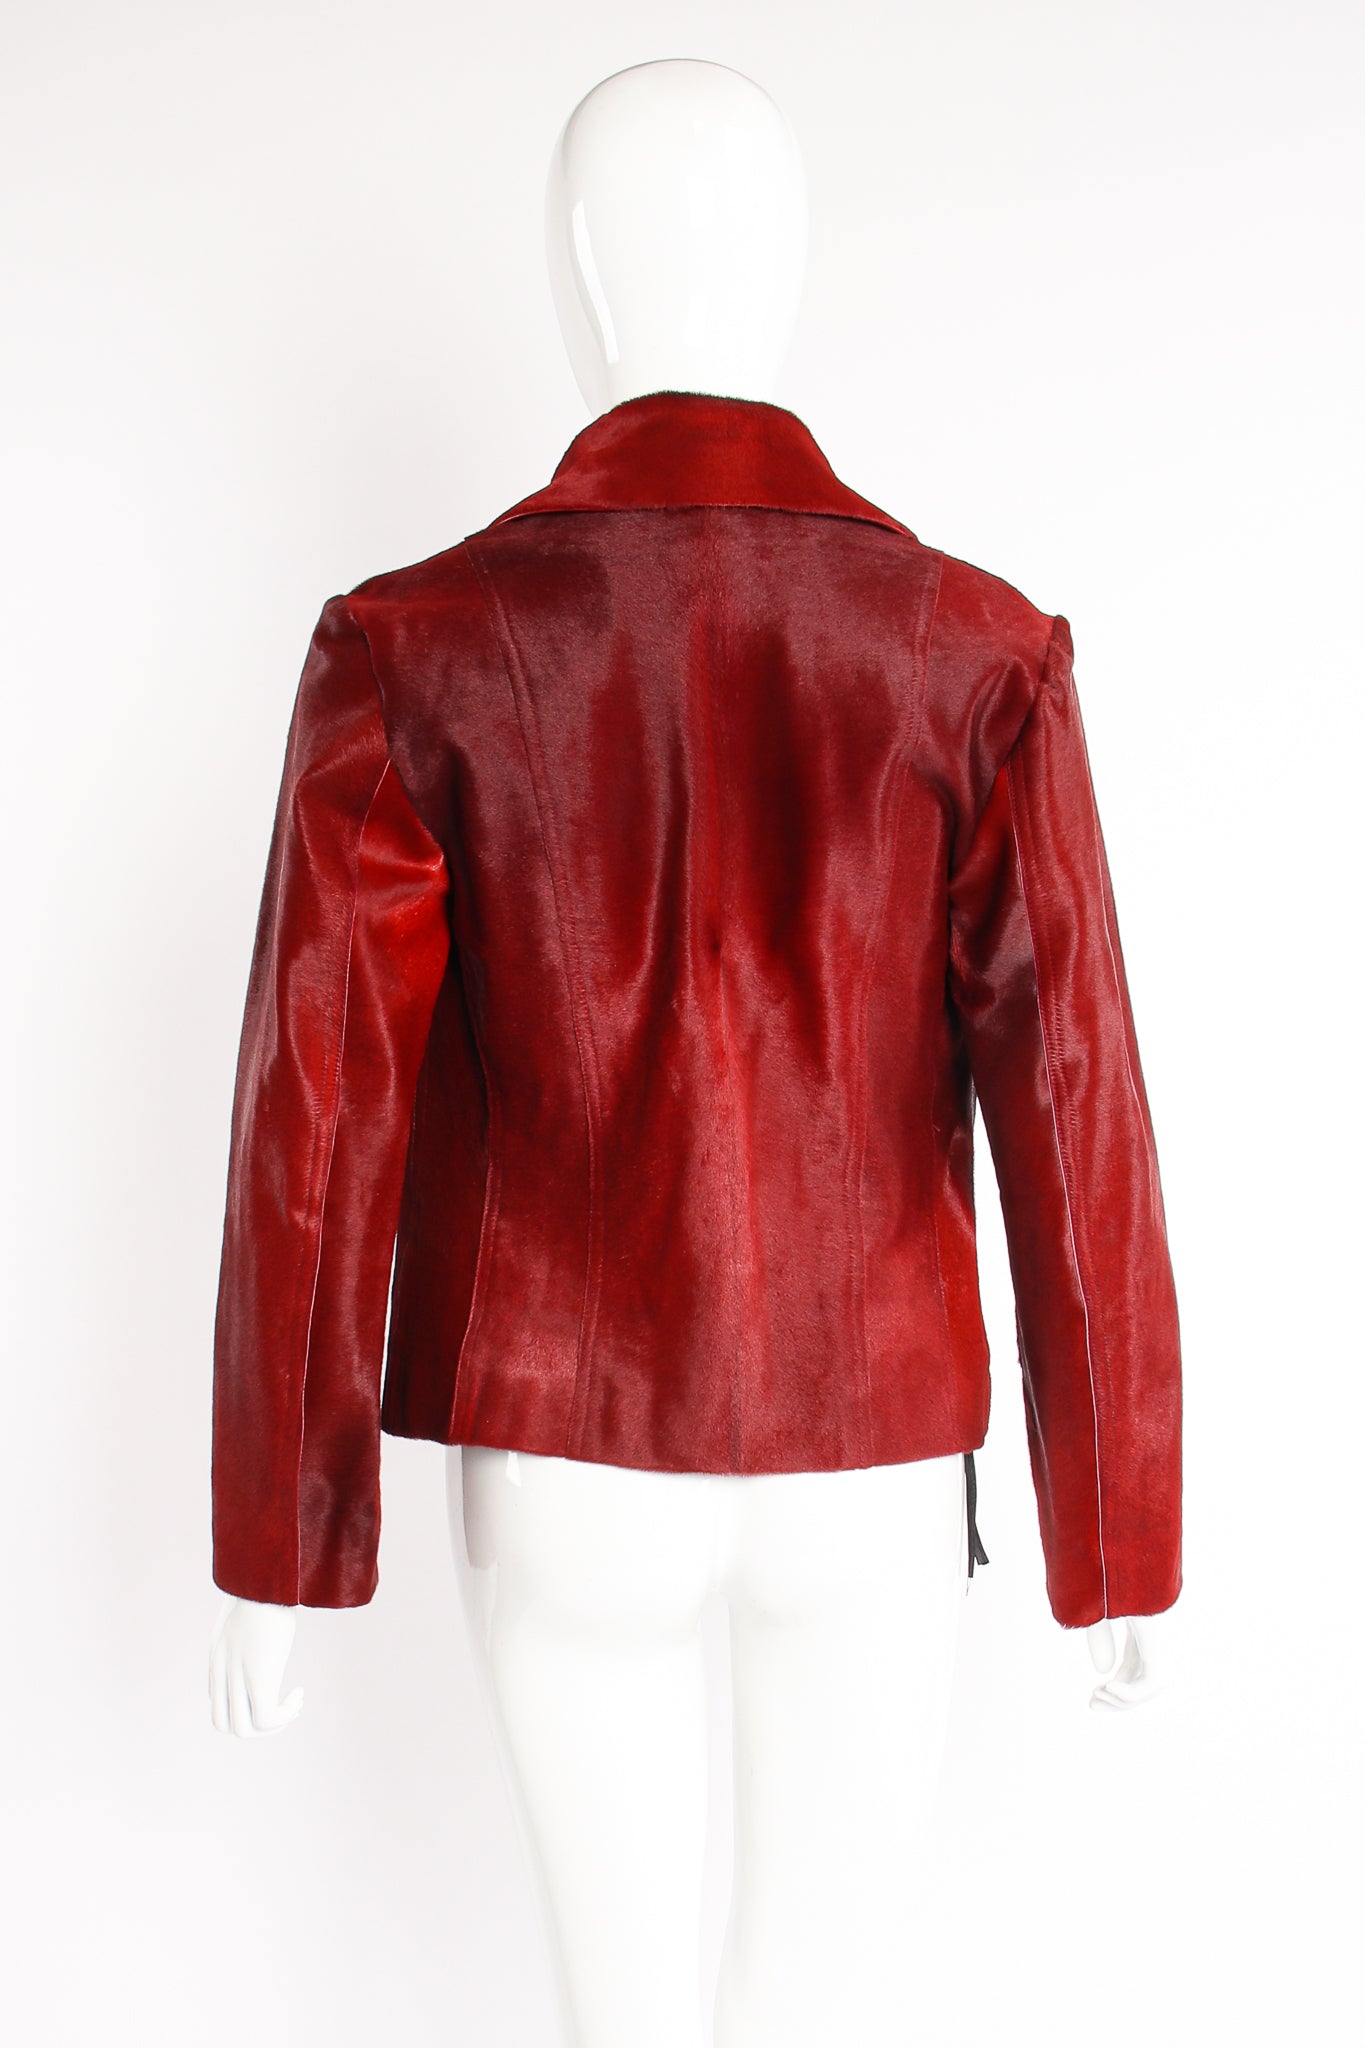 Vintage Plein Sud Blood red Pony Hair Moto Jacket on Mannequin back at Recess Los Angeles